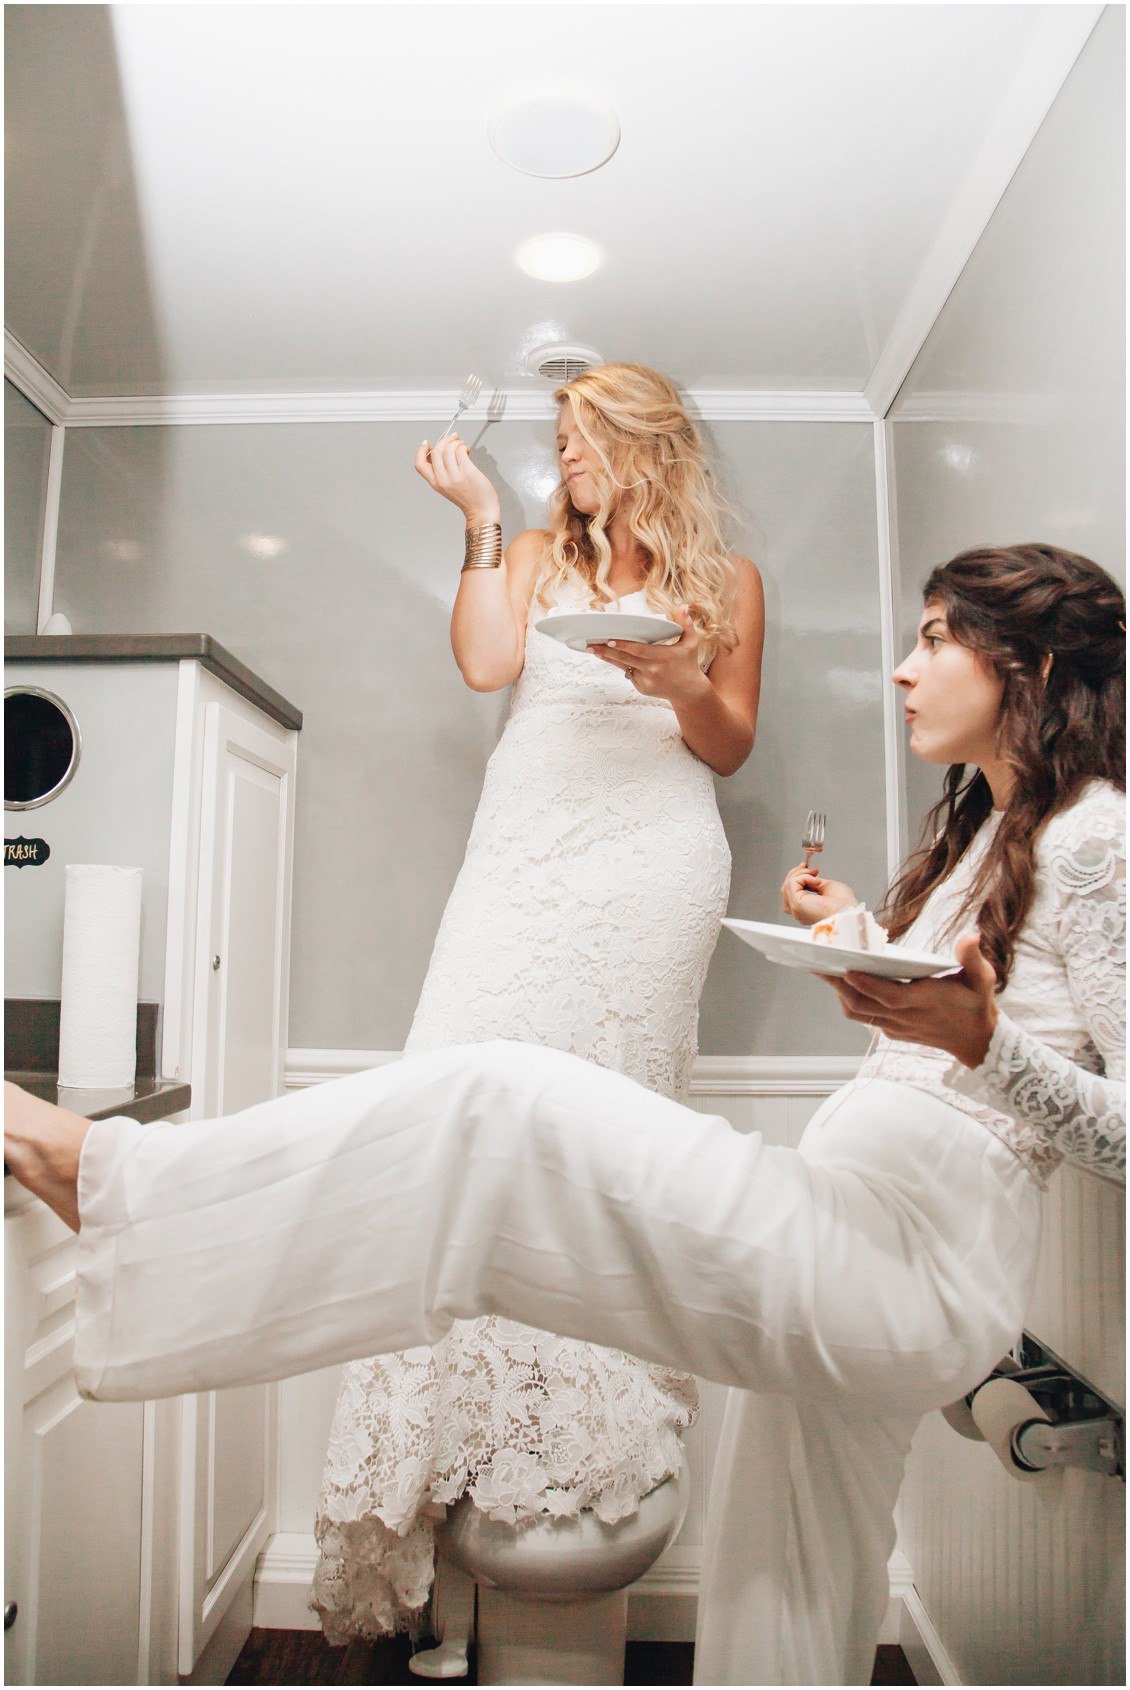 Brides eating cake in the bathroom | My Eastern Shore Wedding | Sherwood Florist | Cecile Storm Photography